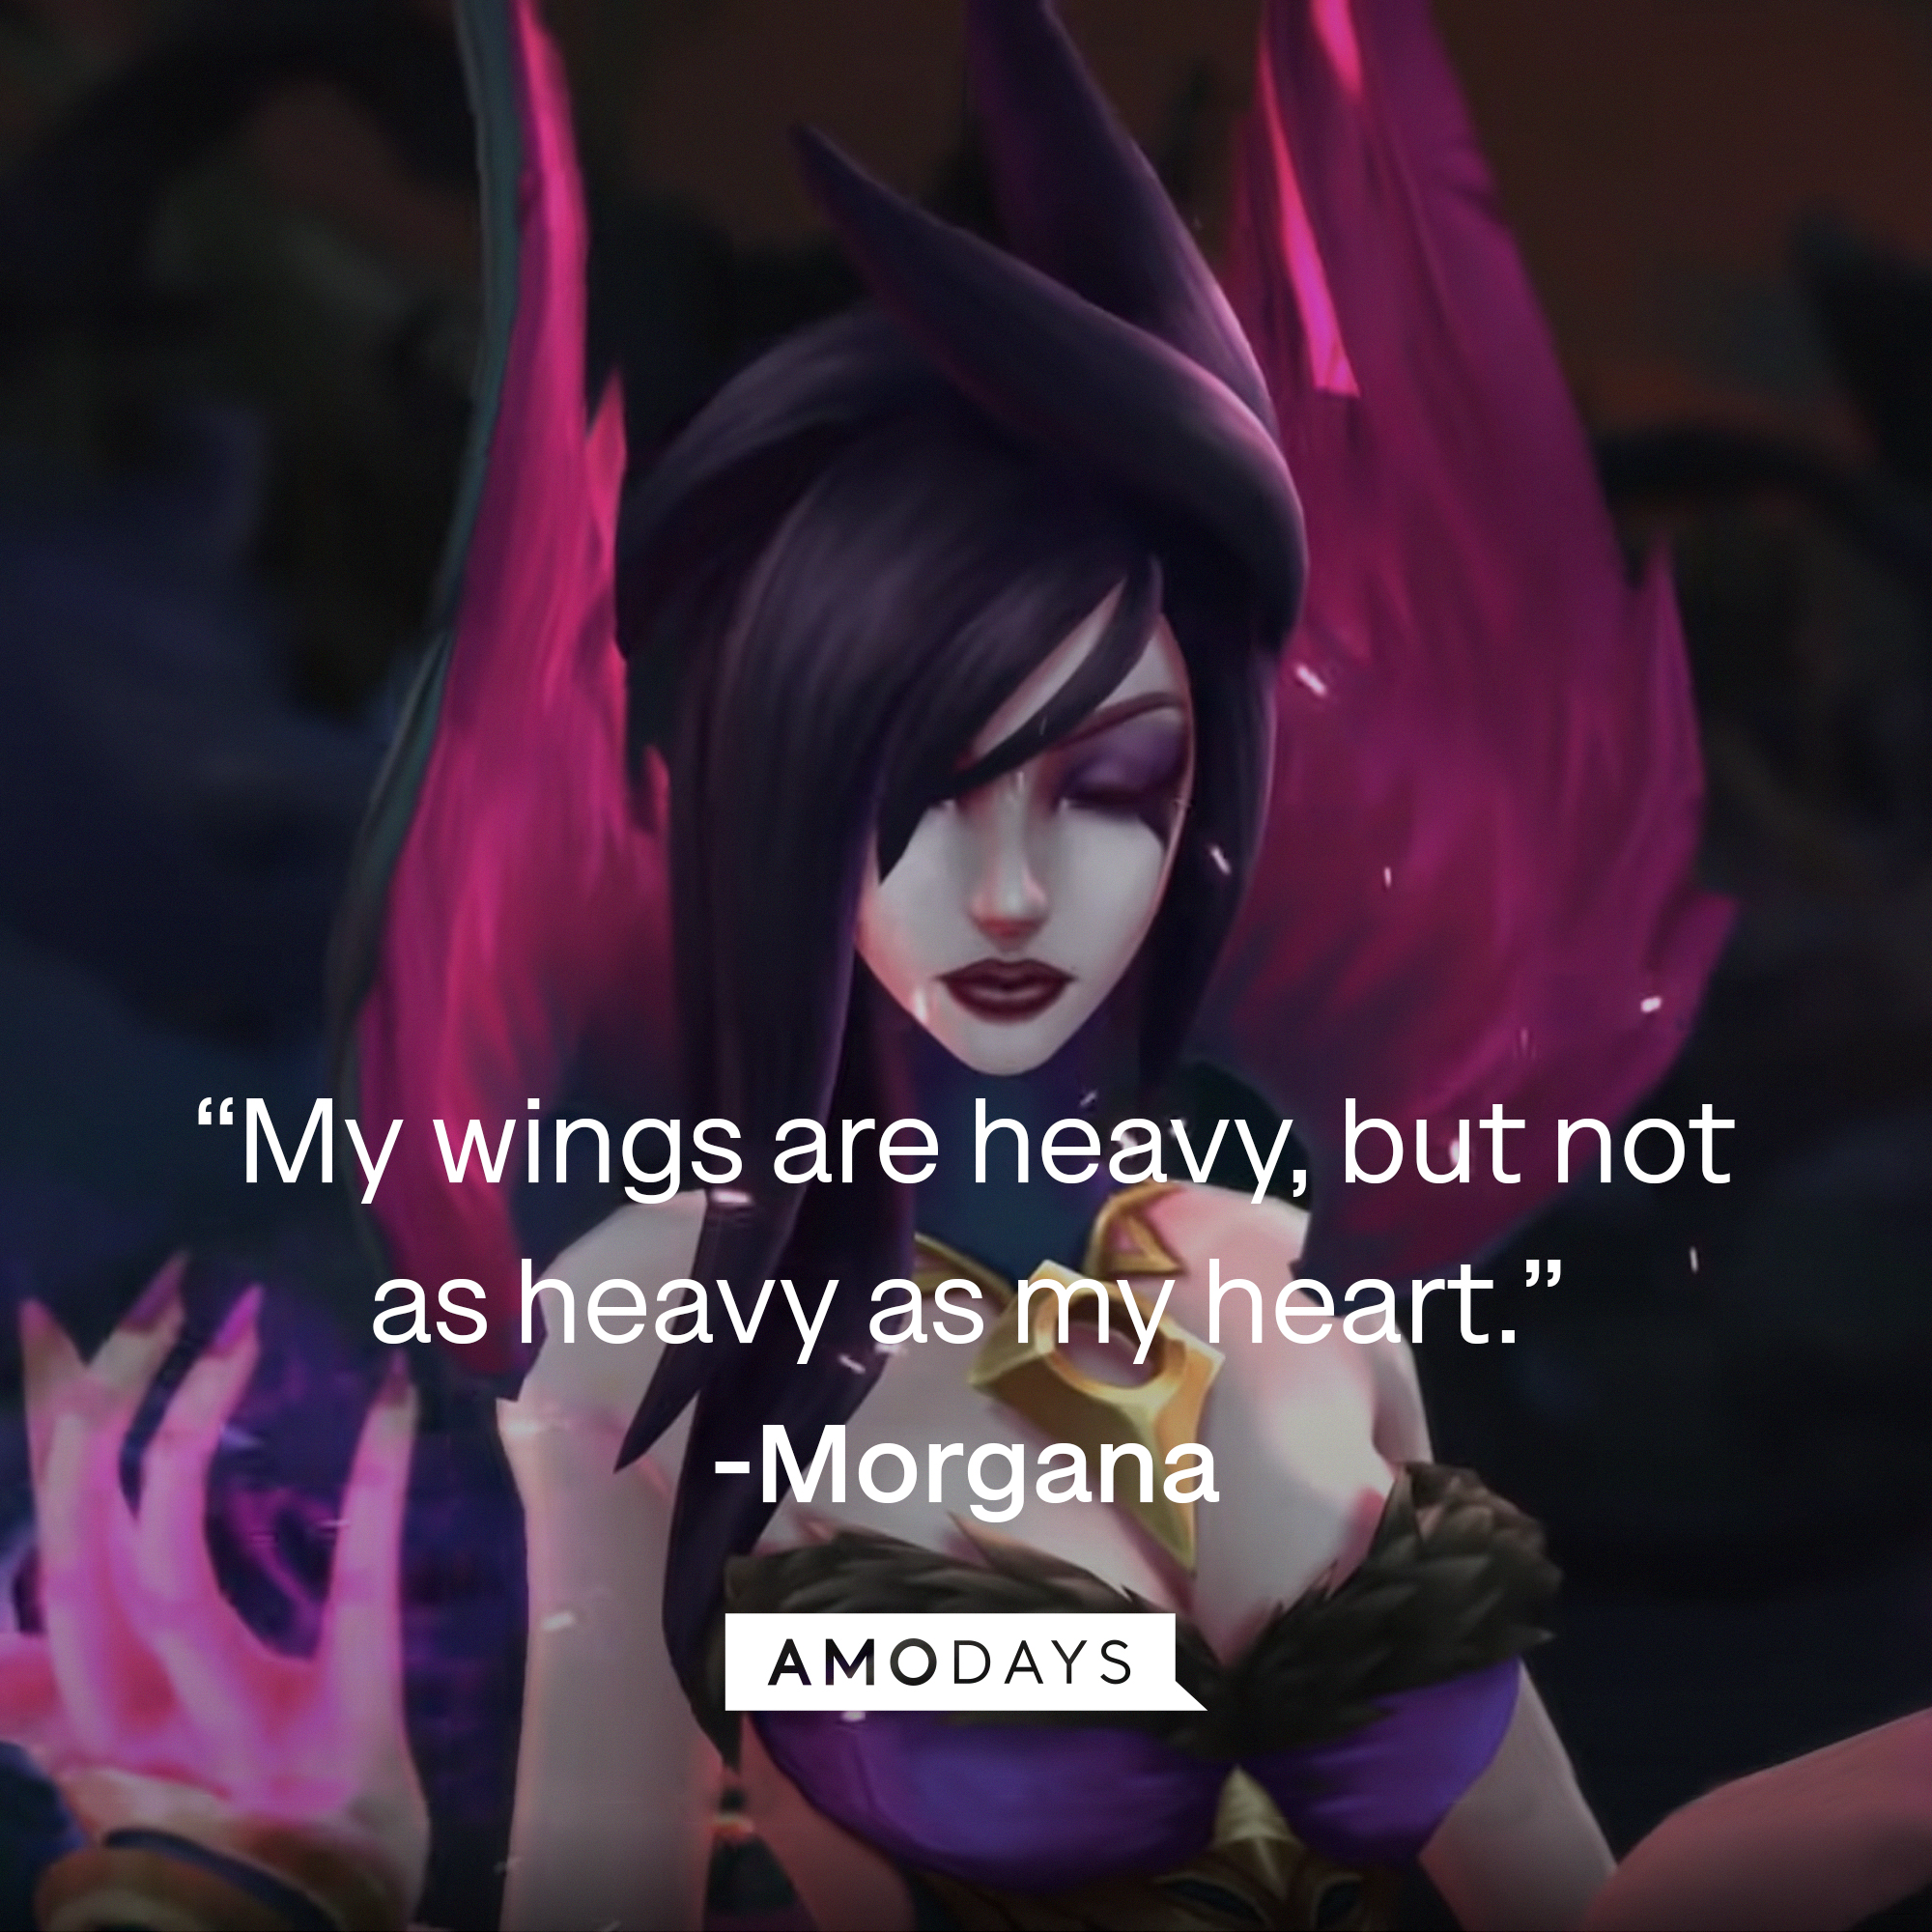 An image of Morgana, with her quote: “My wings are heavy, but not as heavy as my heart.” | Source: Facebook.com/leagueoflegends